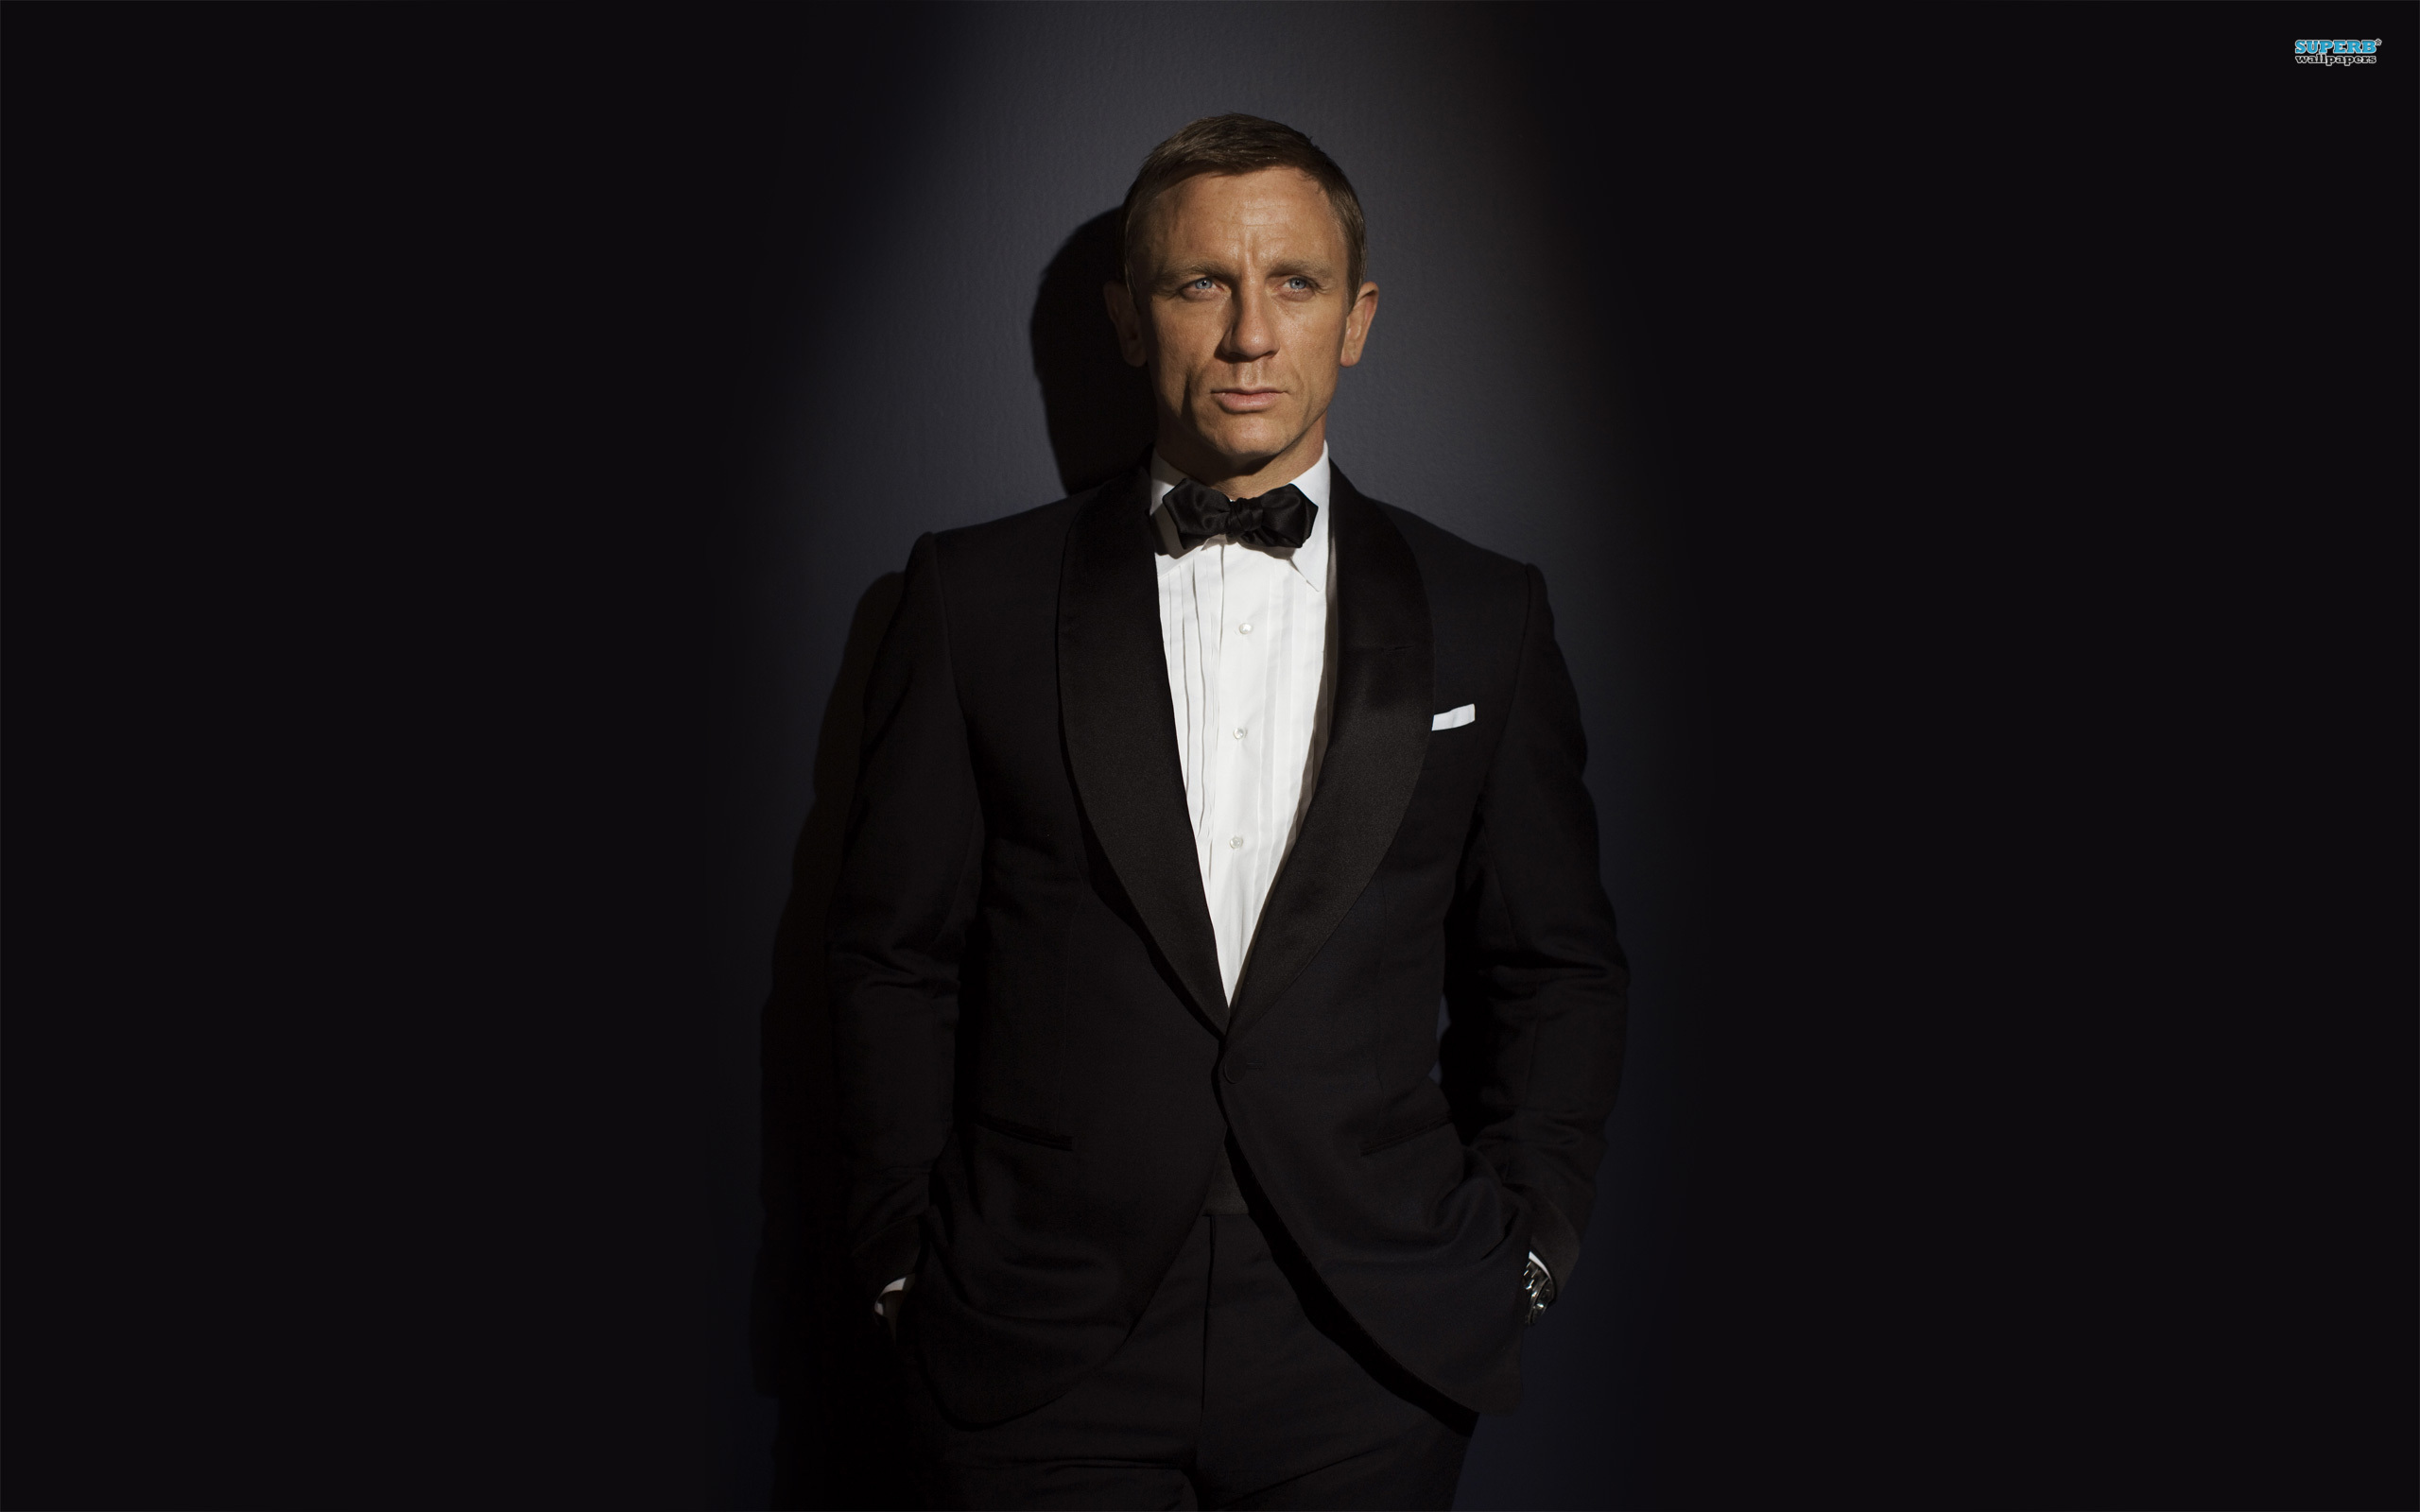 James Bond Daniel Craig wallpapers and images - wallpapers, pictures ...